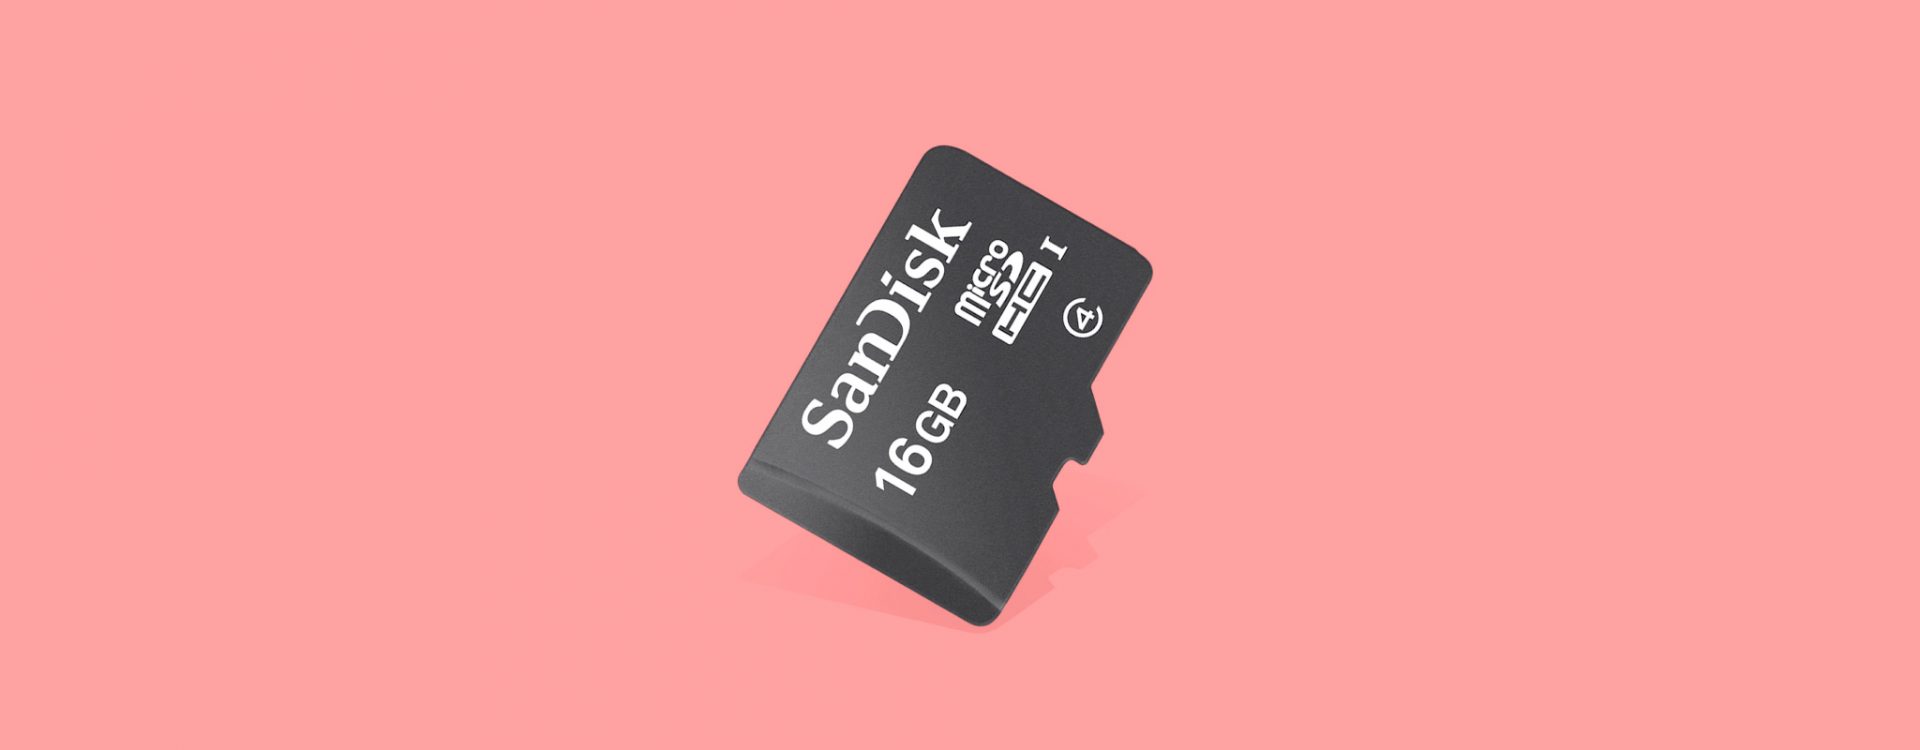 how to get files off a damaged micro sd card